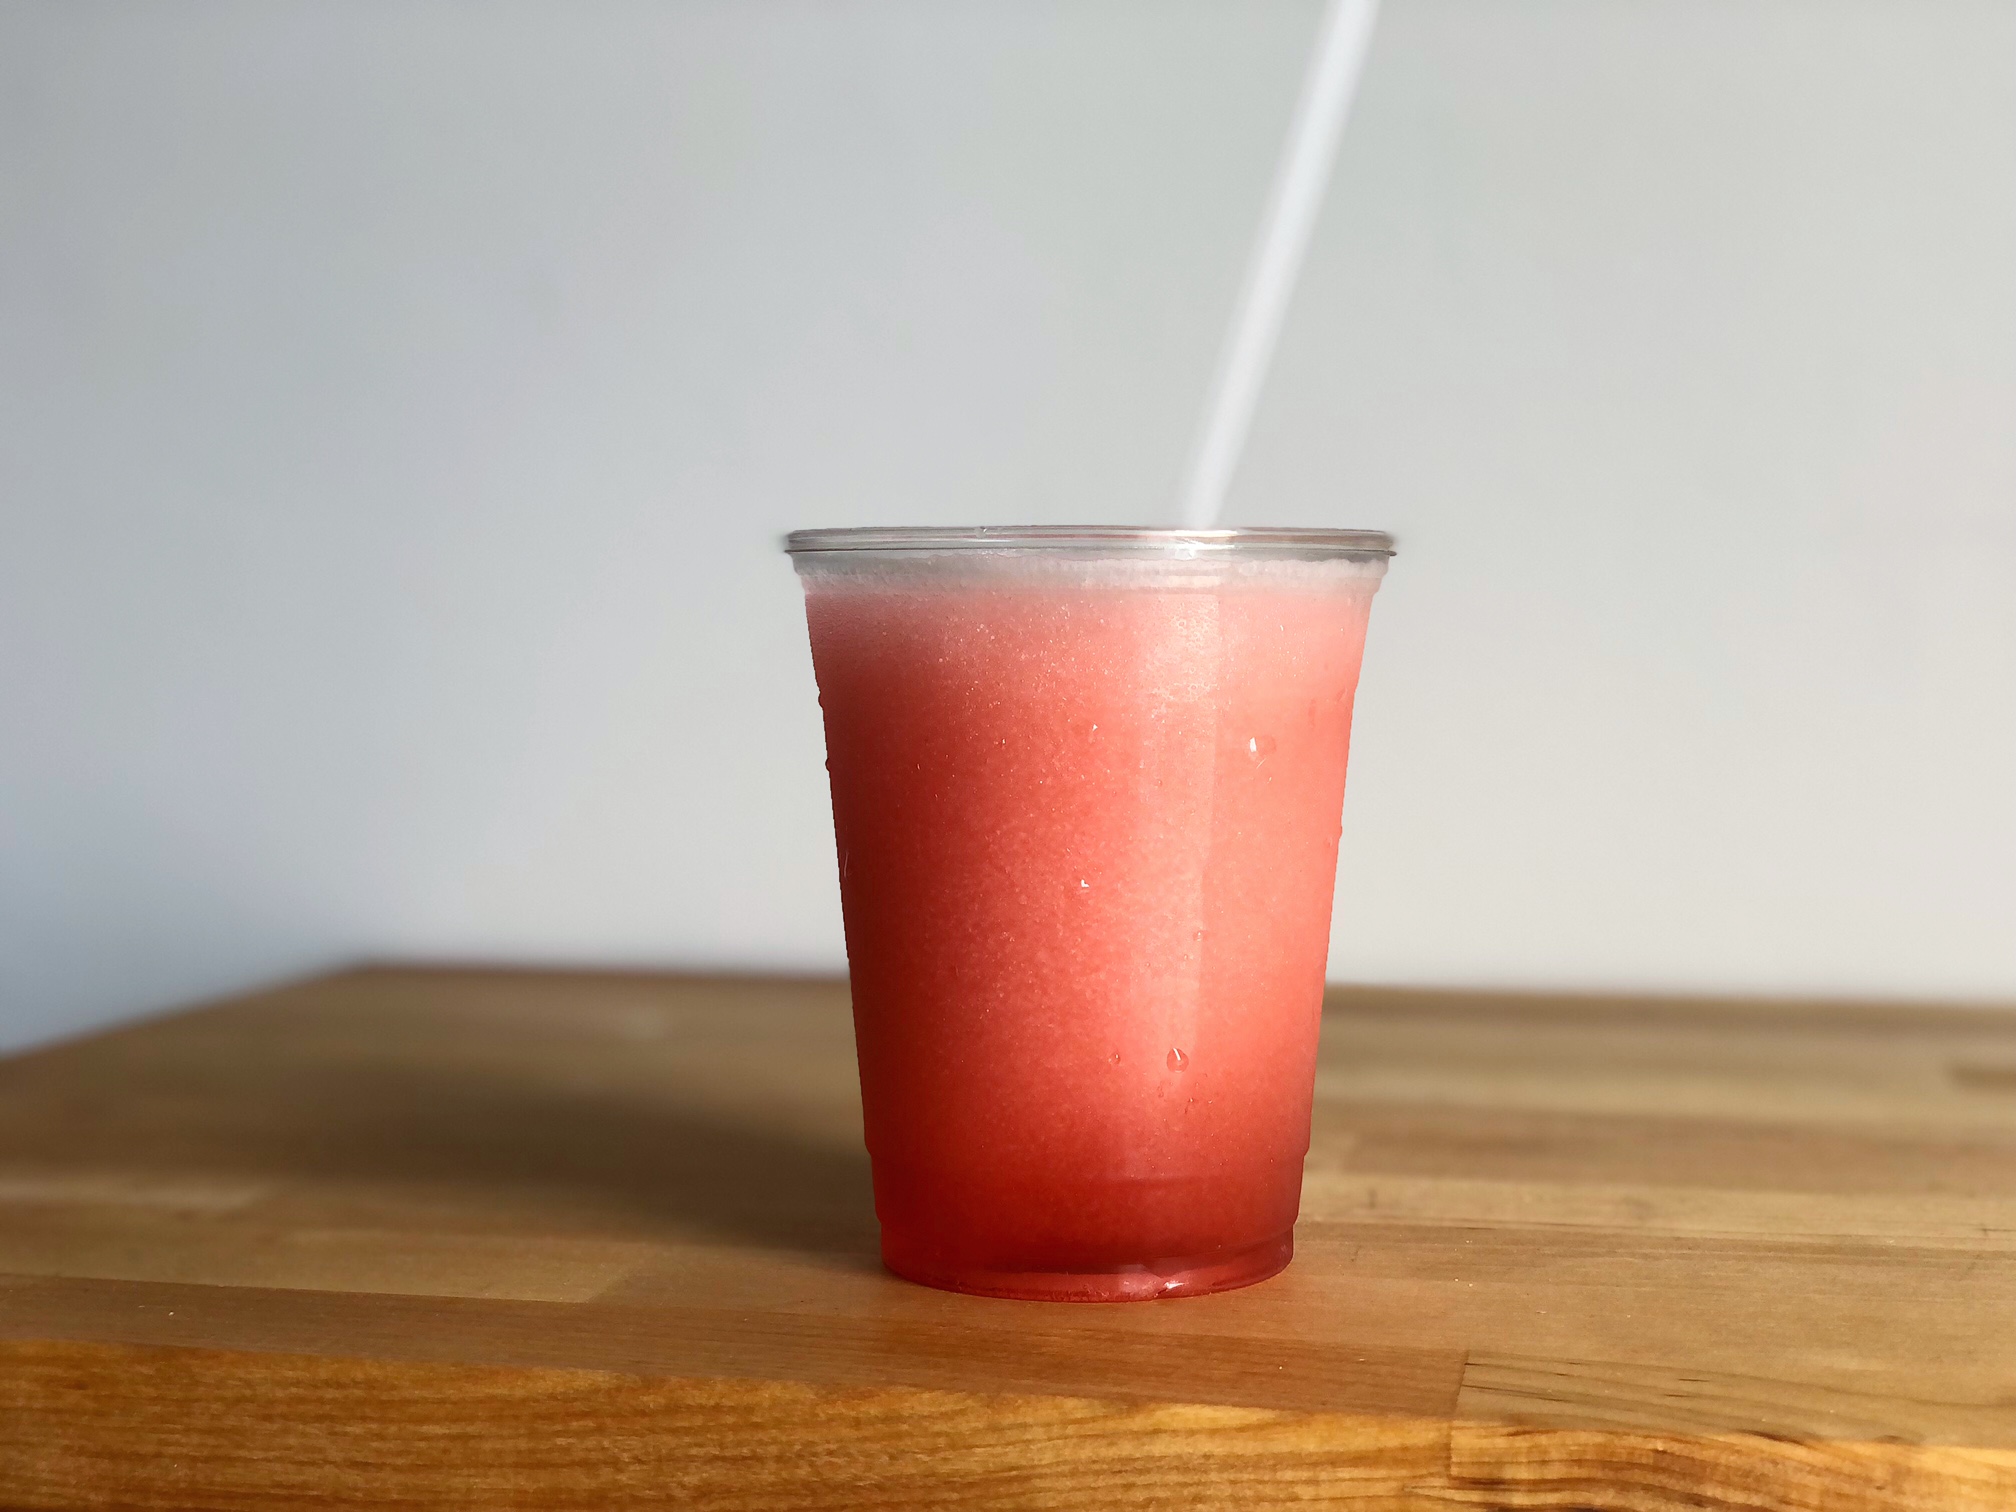 On a butcher block counter, there is a pink Aperol spritz slush from Art Mart in a plastic to go cup with a plastic straw. Photo by Alyssa Buckley.